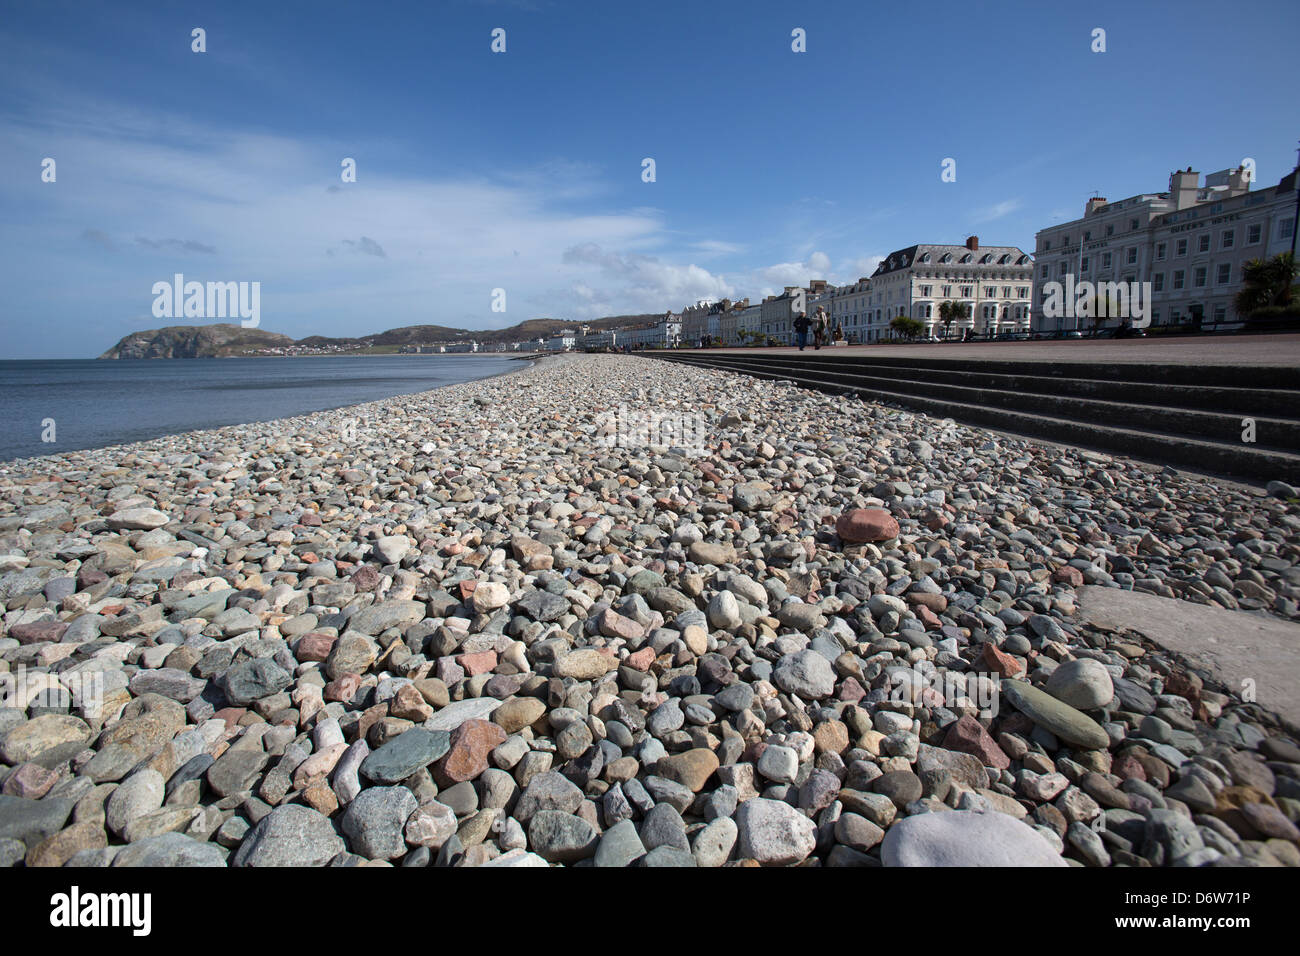 The town of Llandudno, Wales. Picturesque sunny view of the shingle beach on the north shore Llandudno. Stock Photo